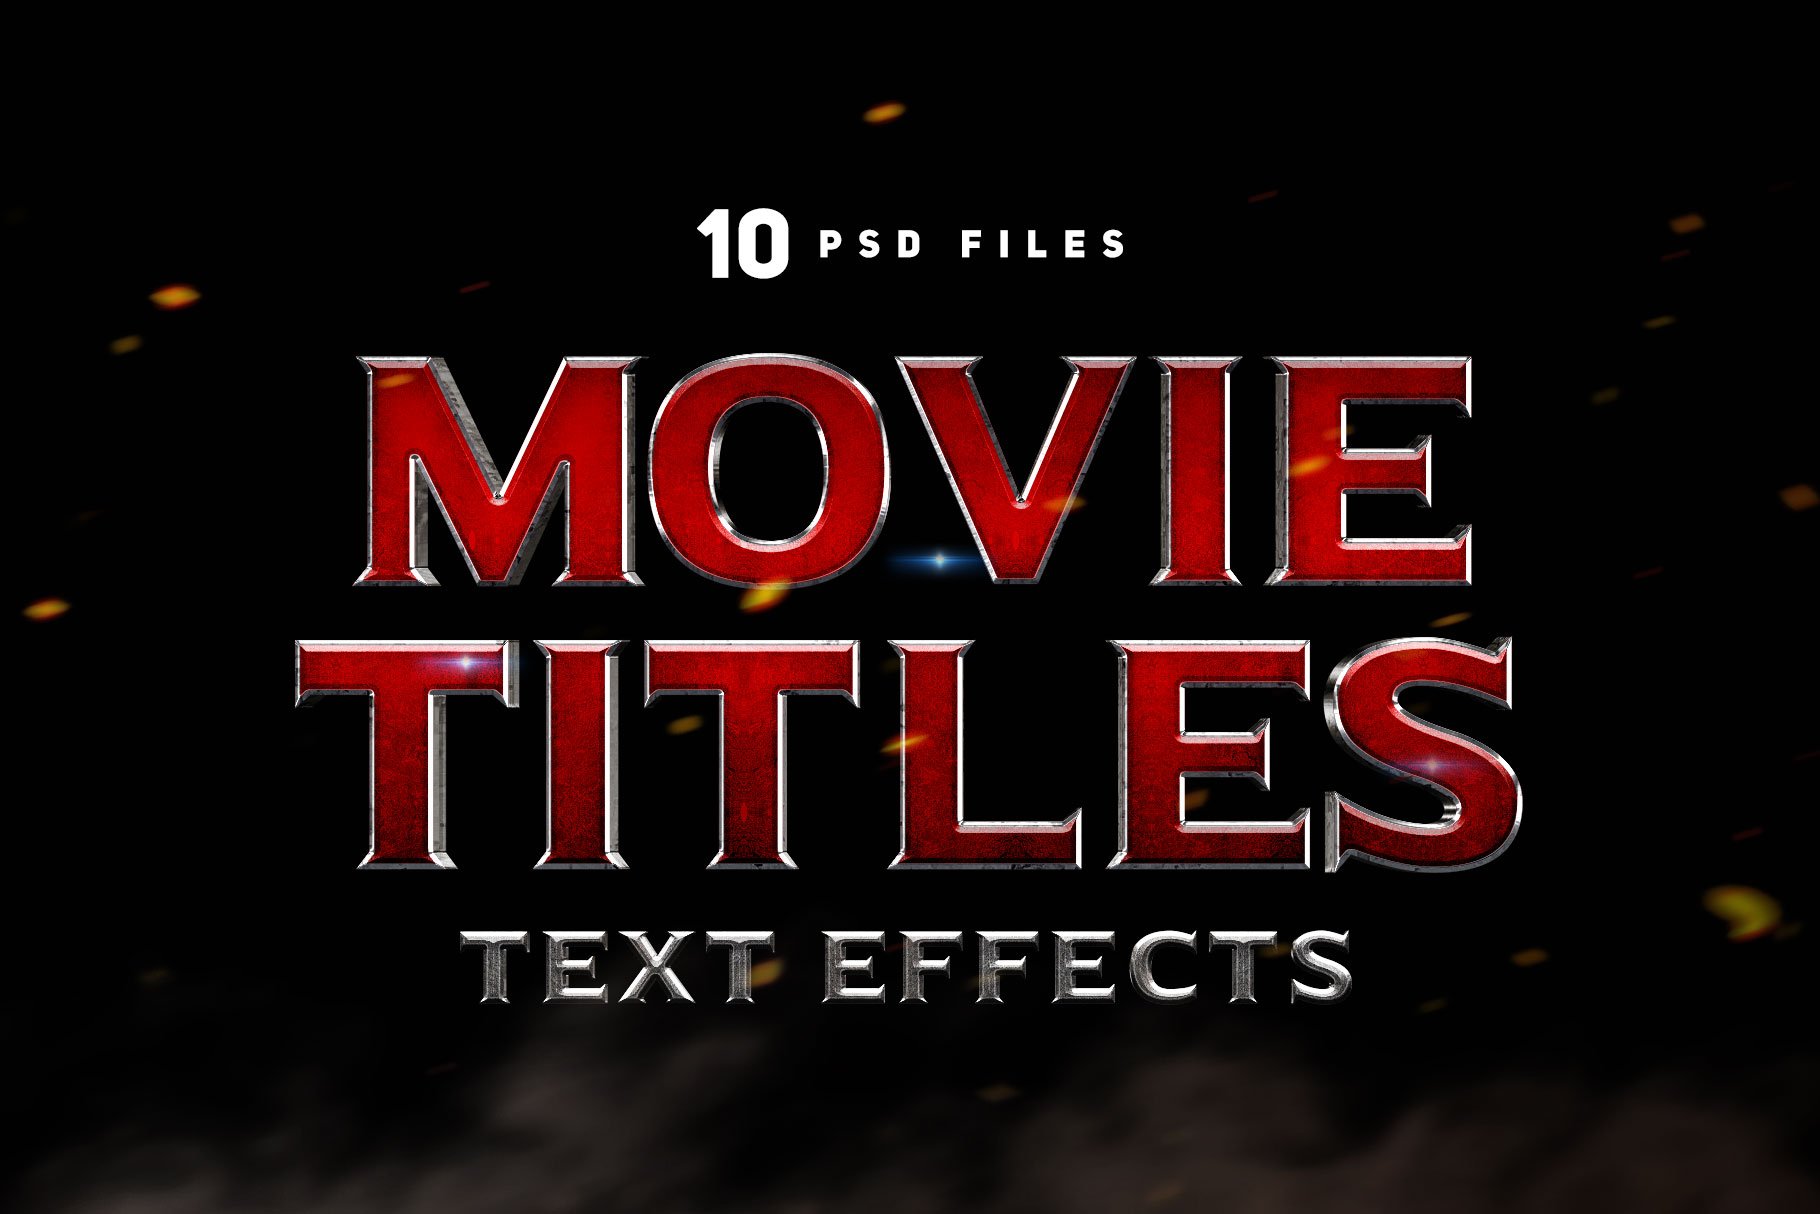 Movie Title Text Effectscover image.